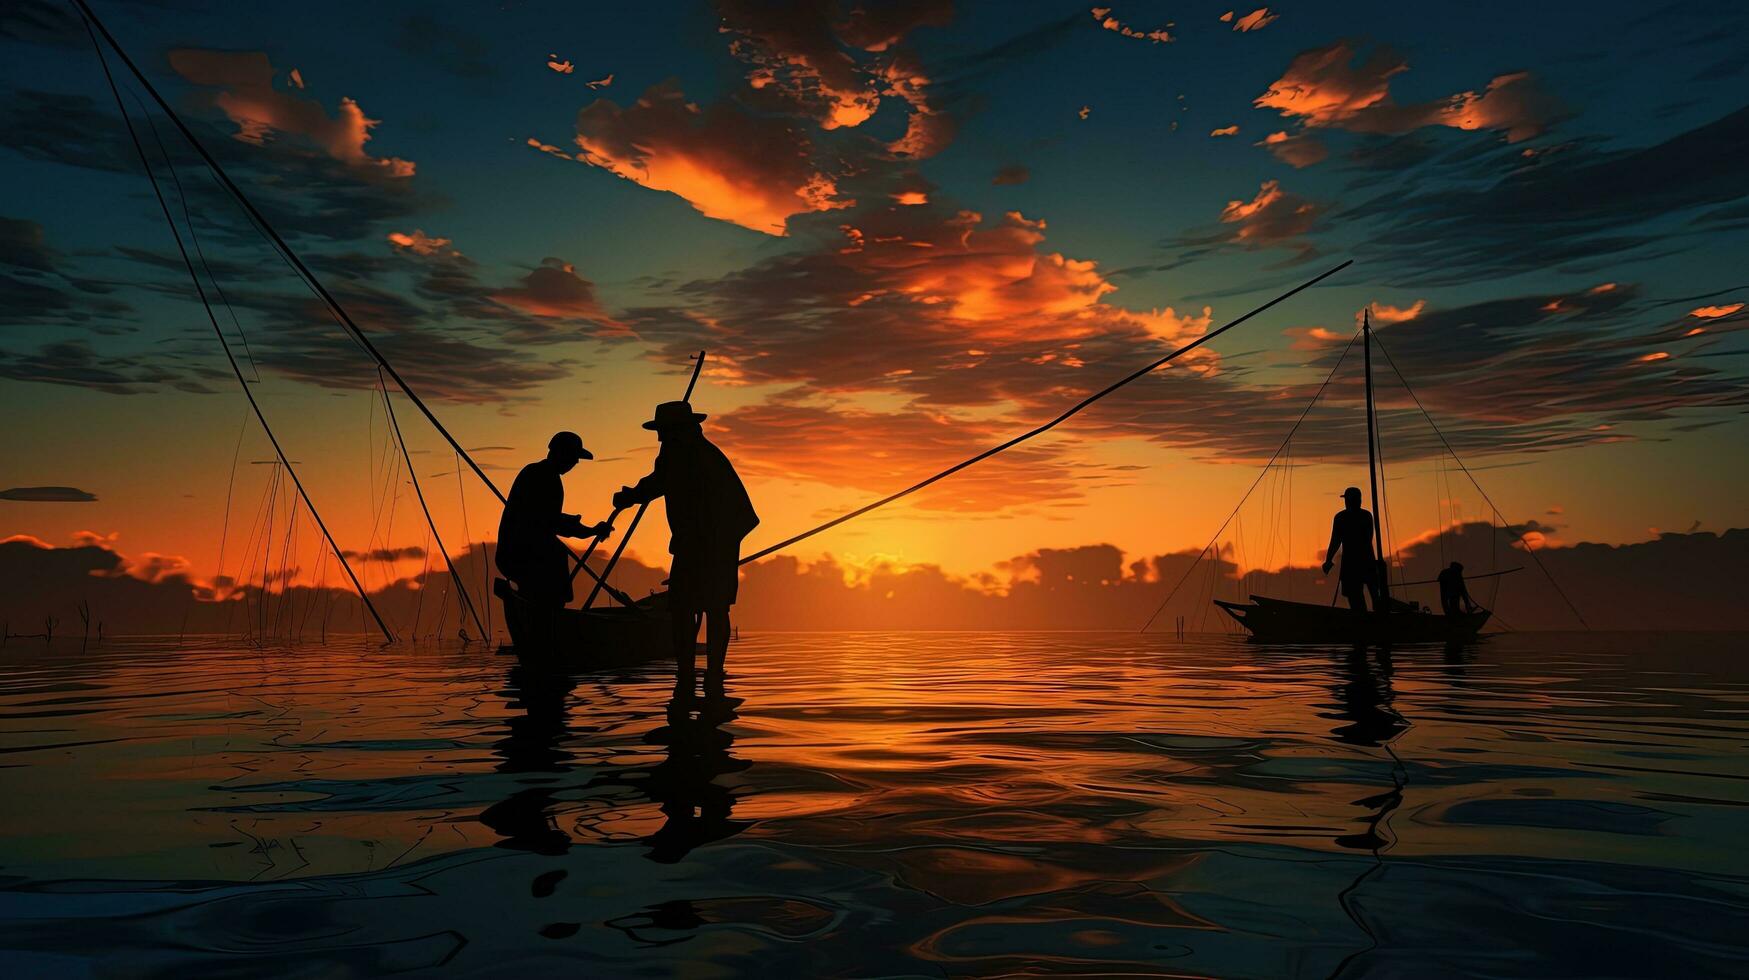 Fishers outlines at sunrise in the tropics. silhouette concept photo